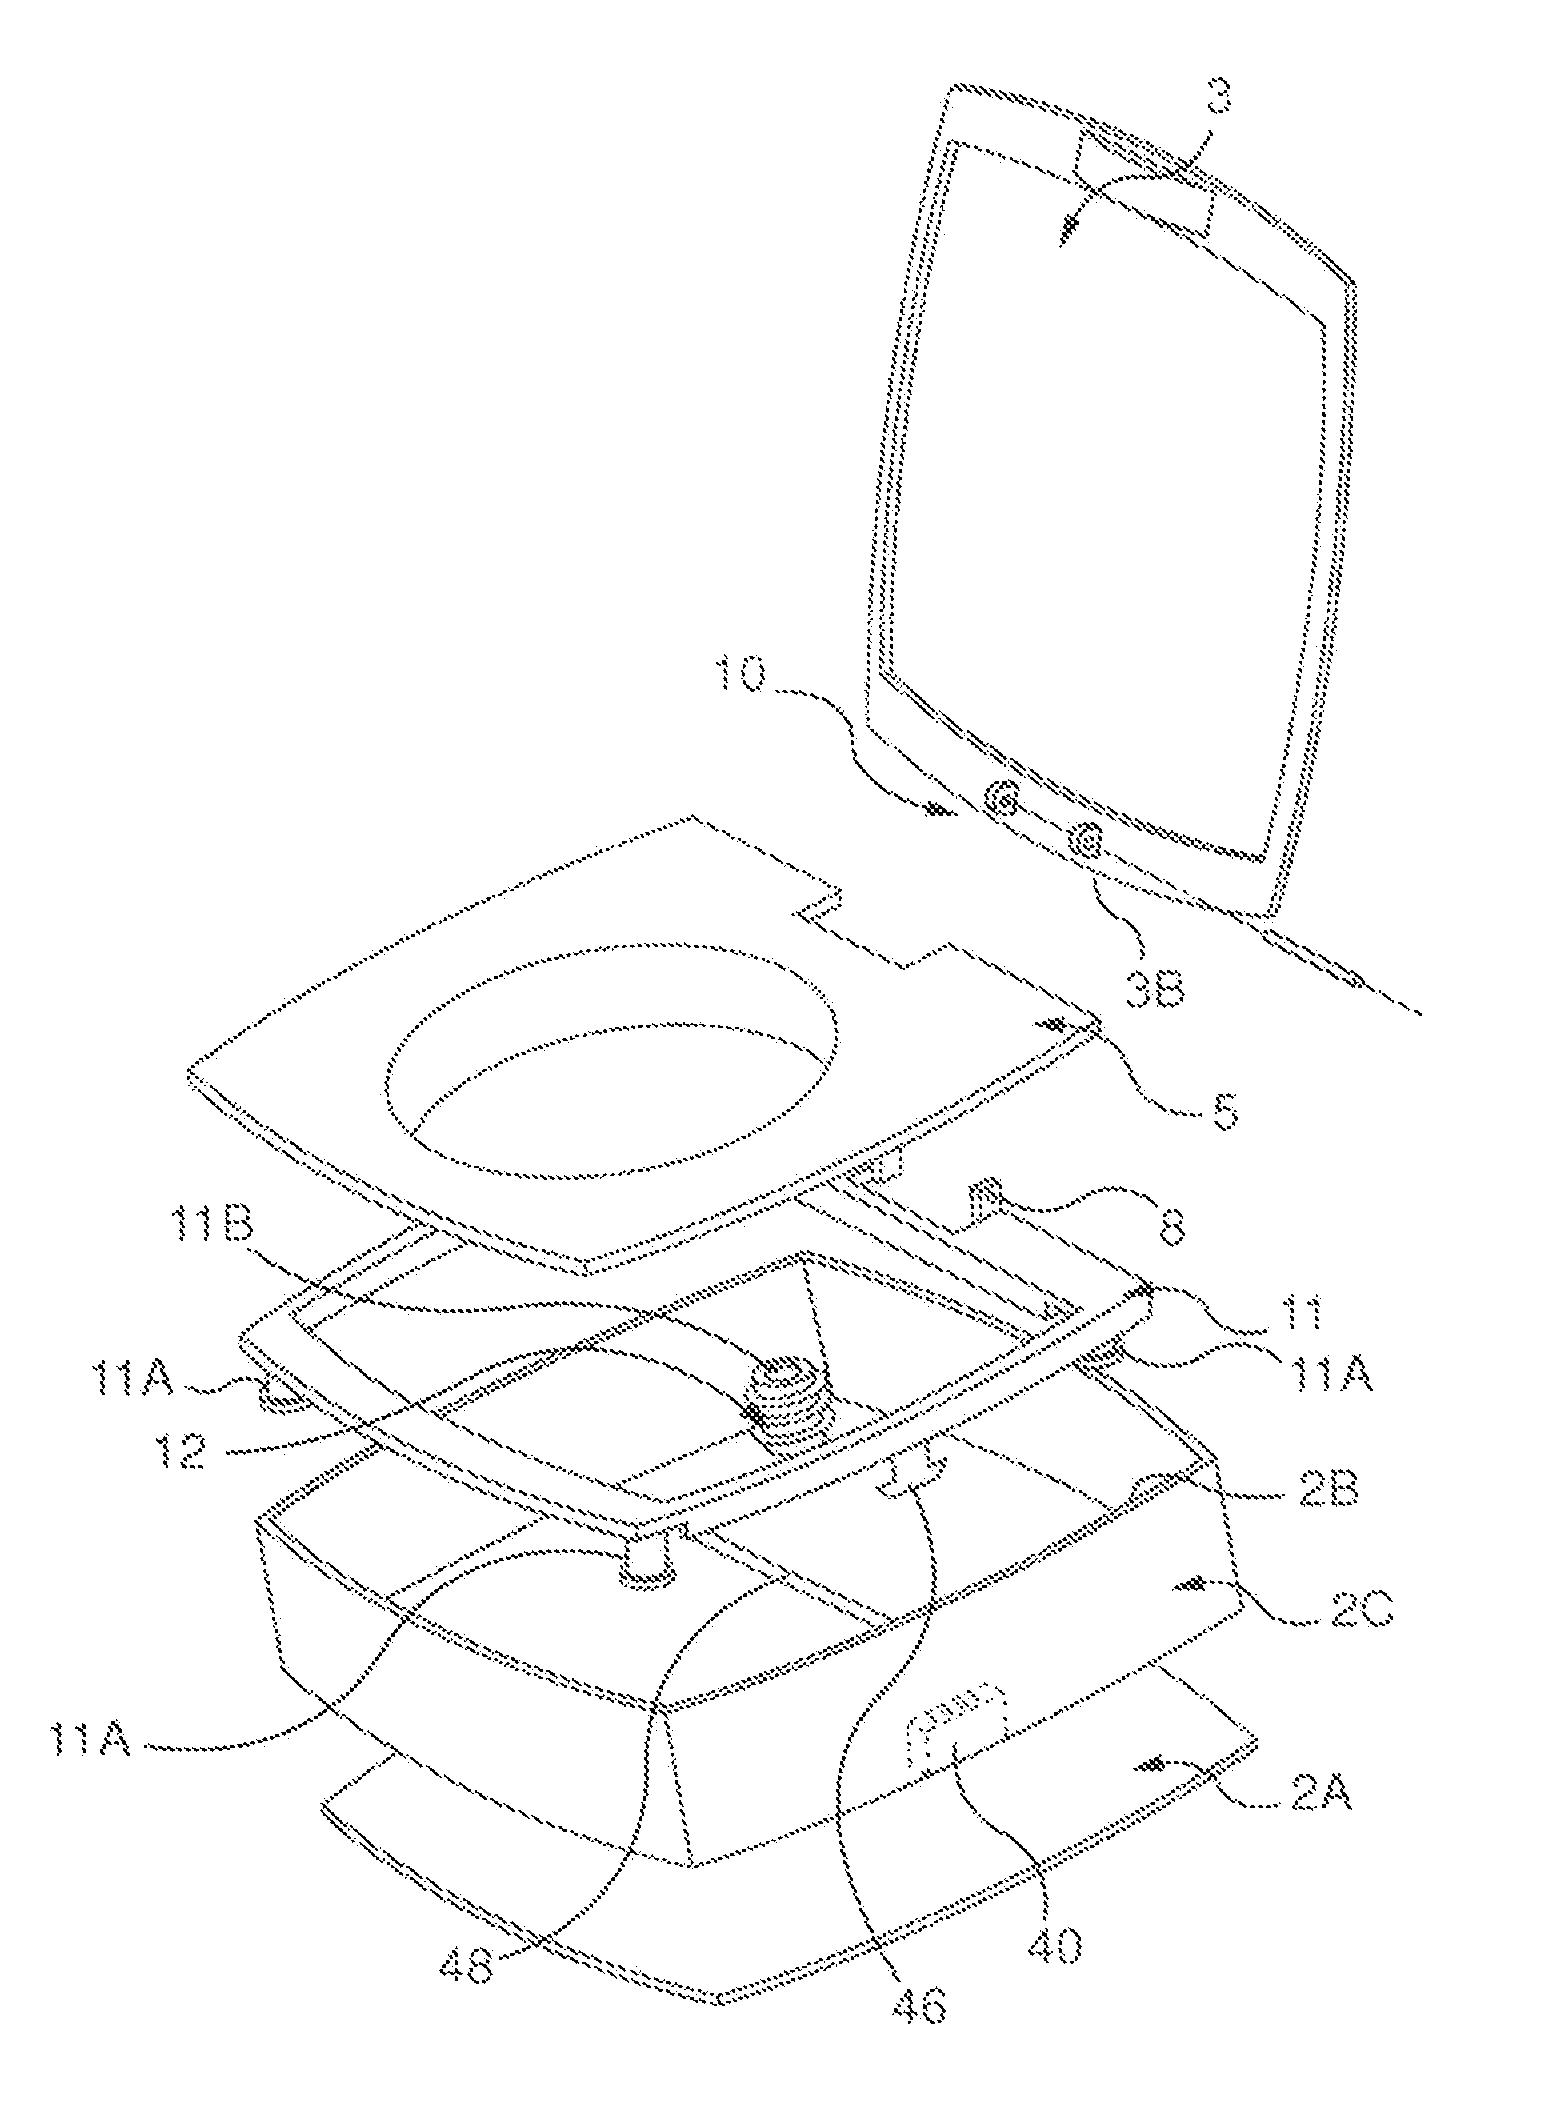 Case for cosmetic or body hygiene product having a retractable hinge